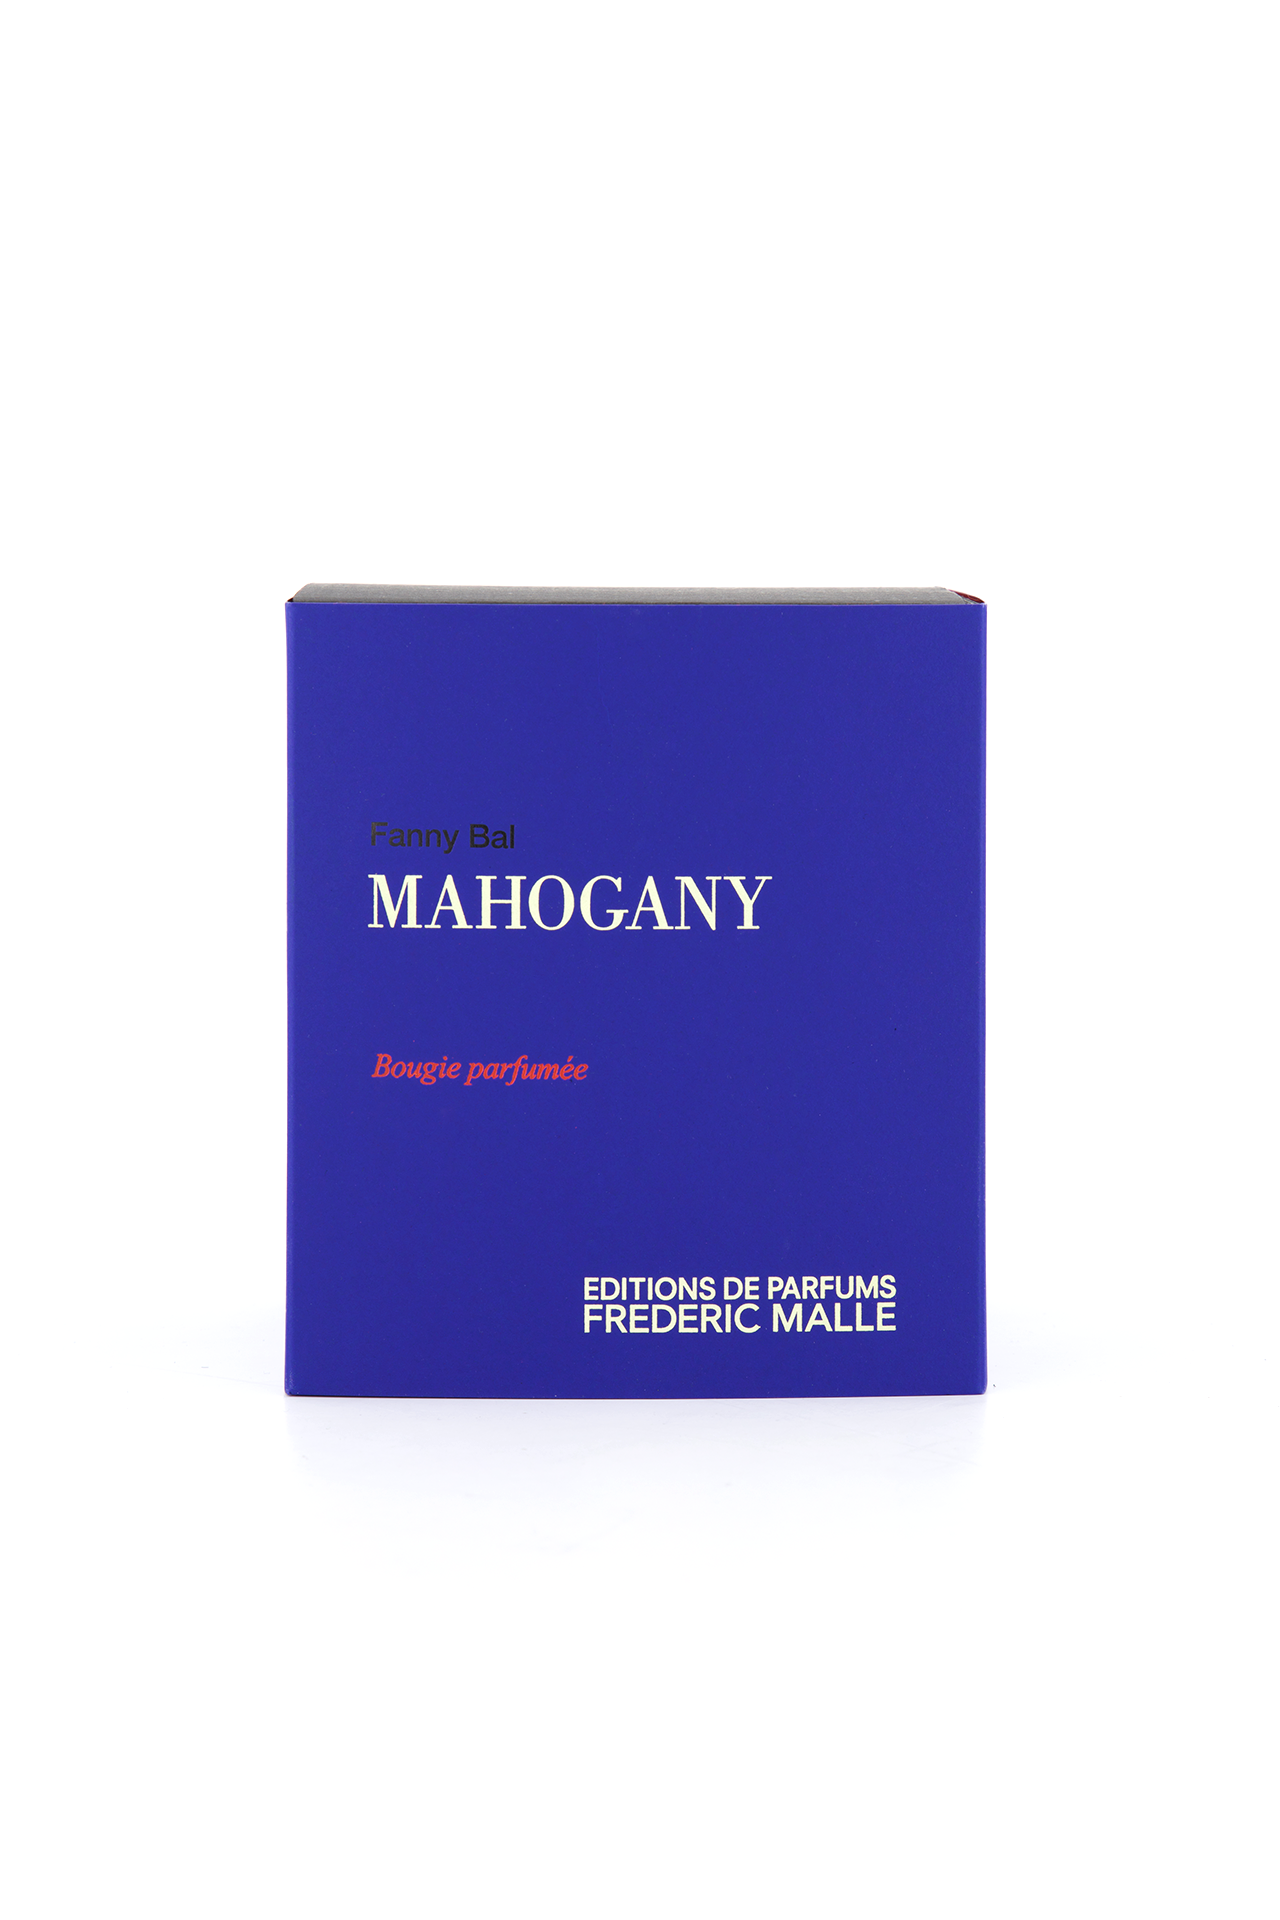 Frederic Malle Mahogany Candle Packaging Image (4636996239475)